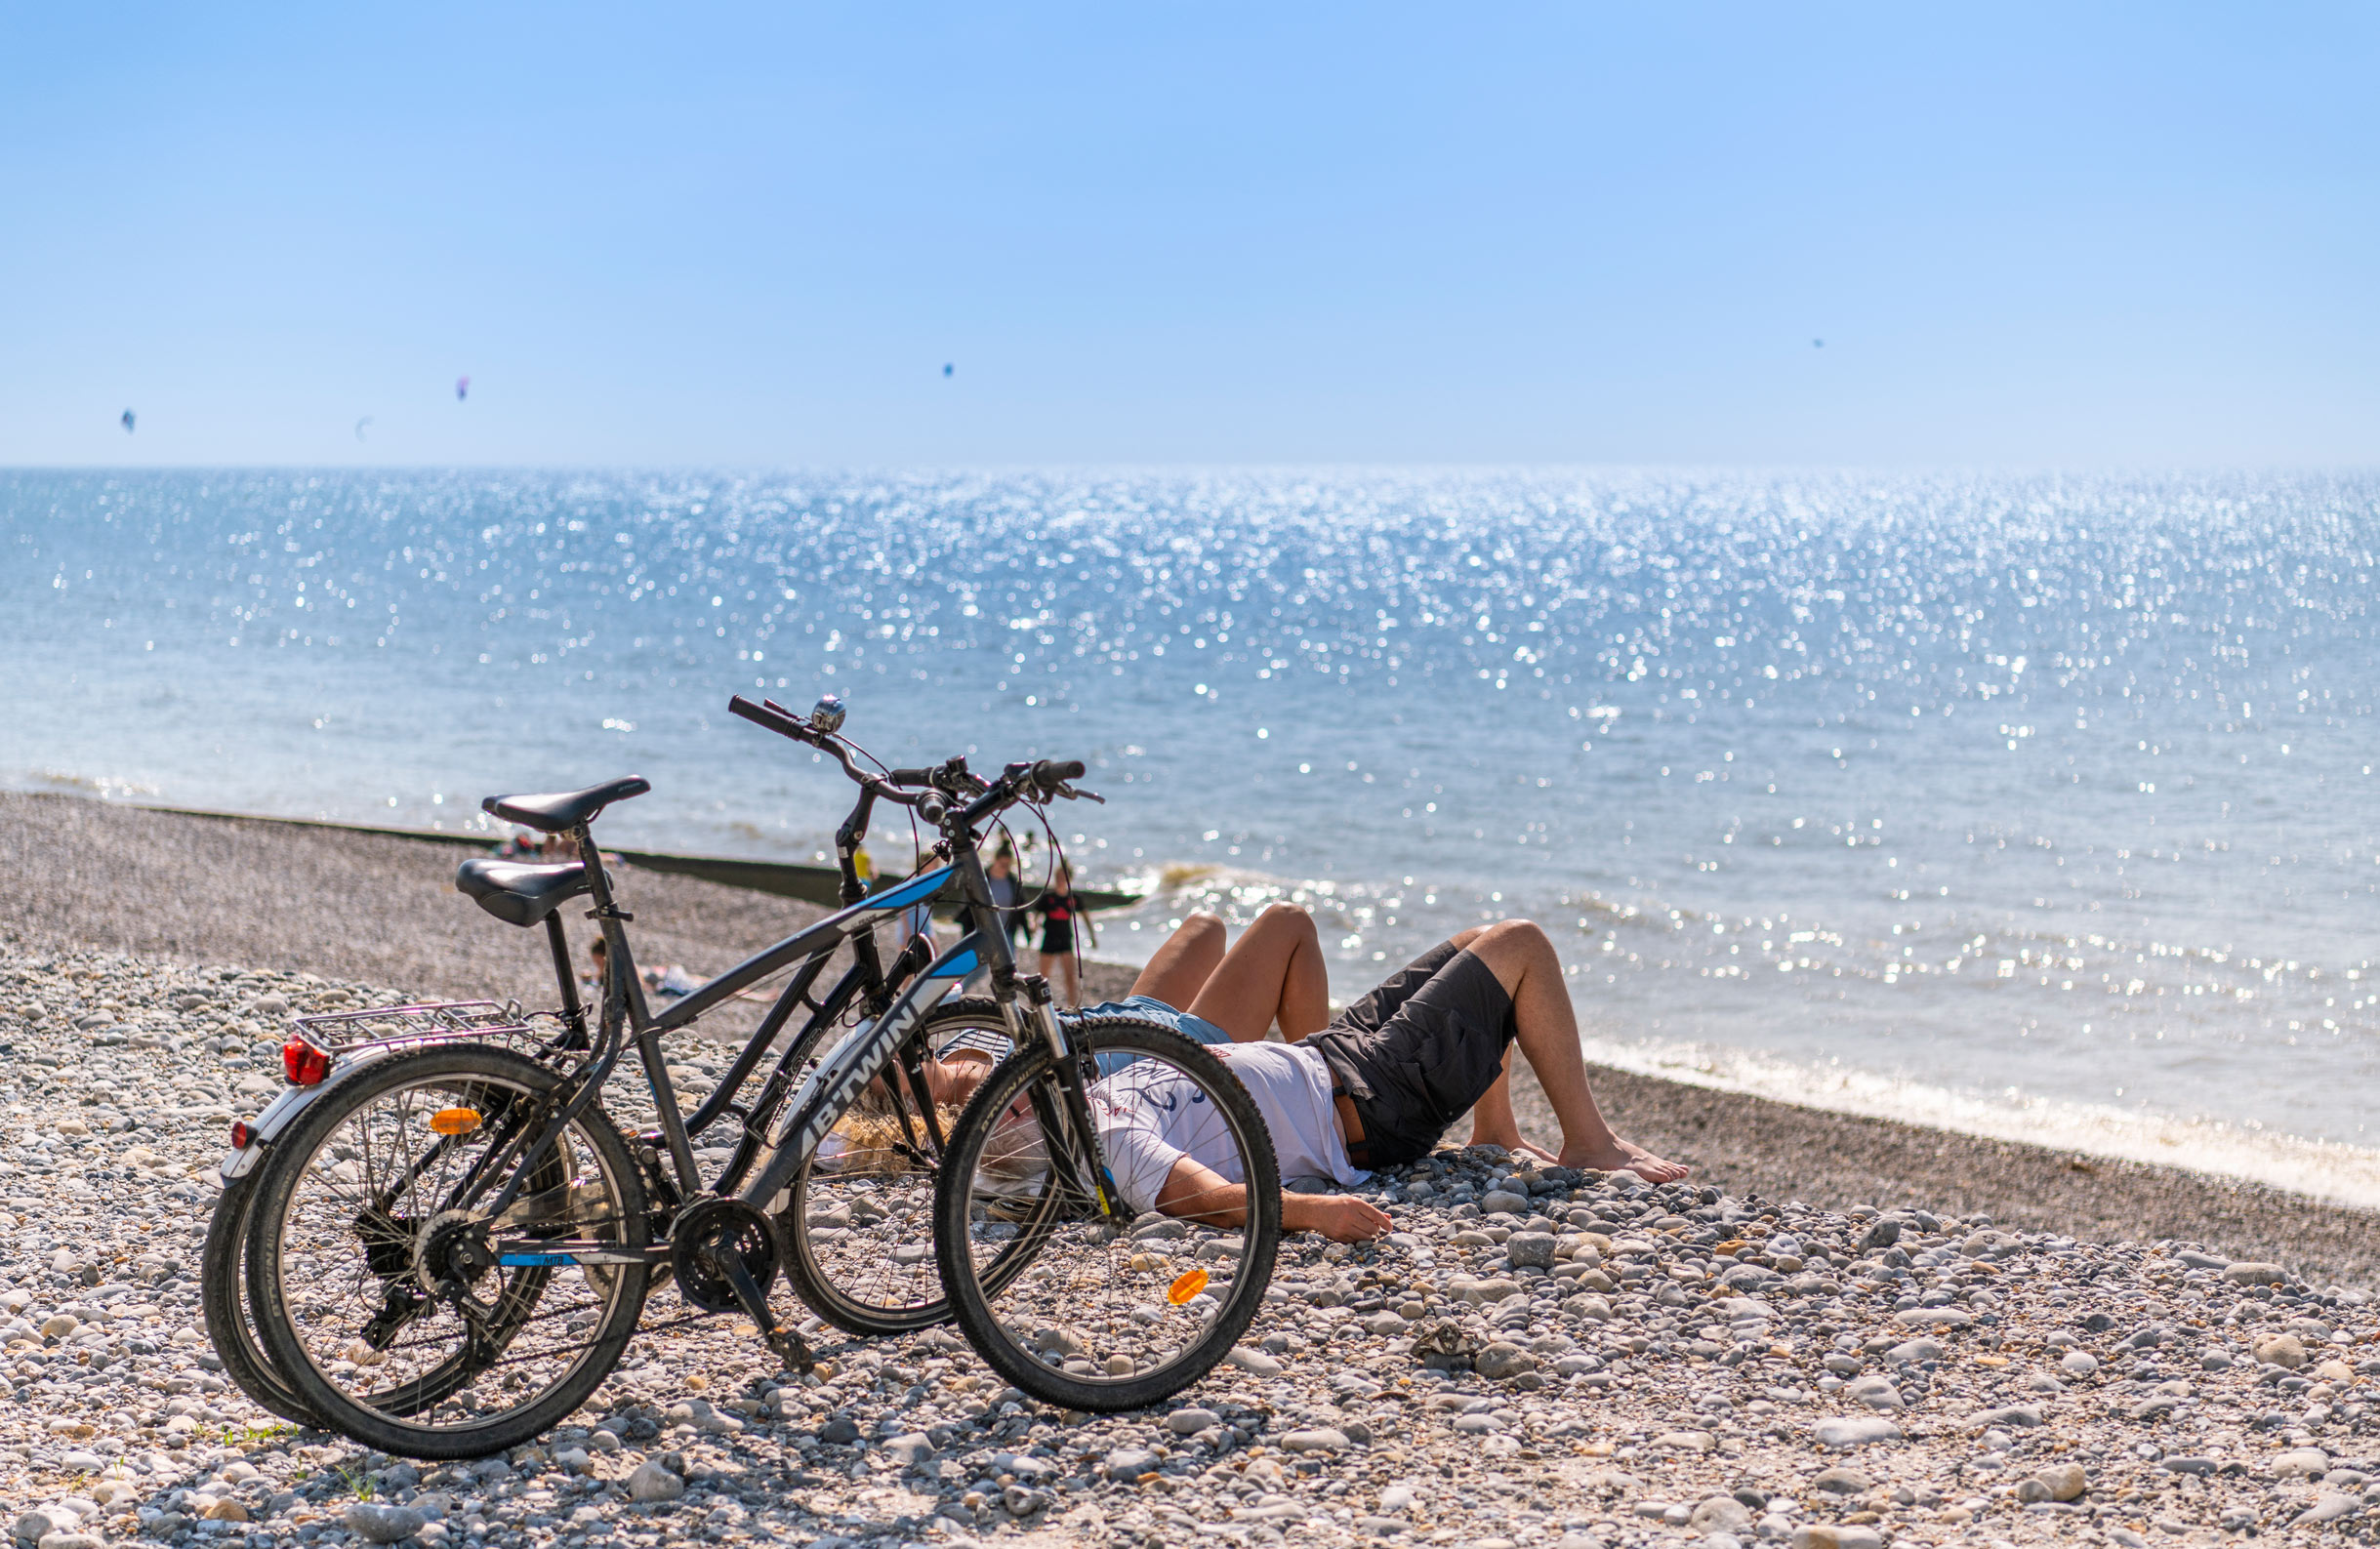 Cycle to Cayeux-sur-mer for its famous beach-huts and boardwalk